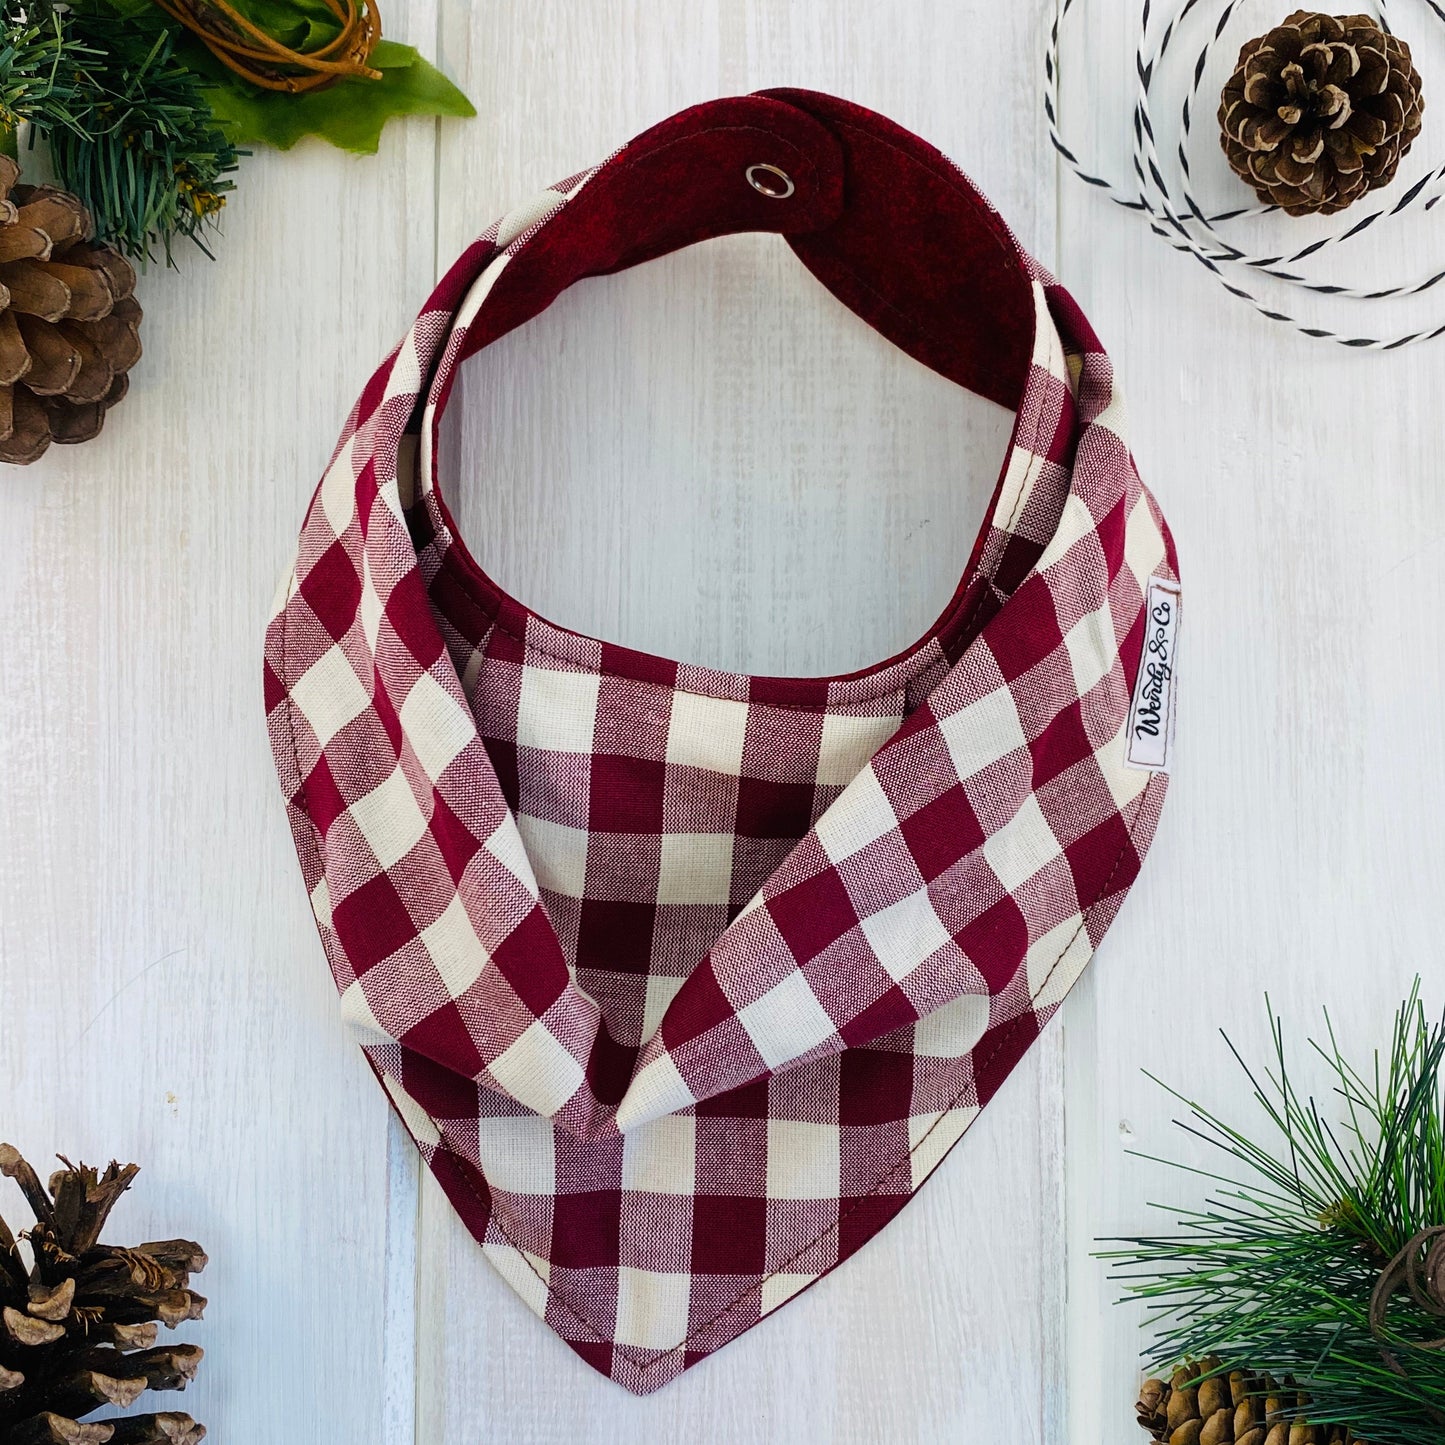 Bandana bib in maroon check for boy or girl, reversible to solid maroon print